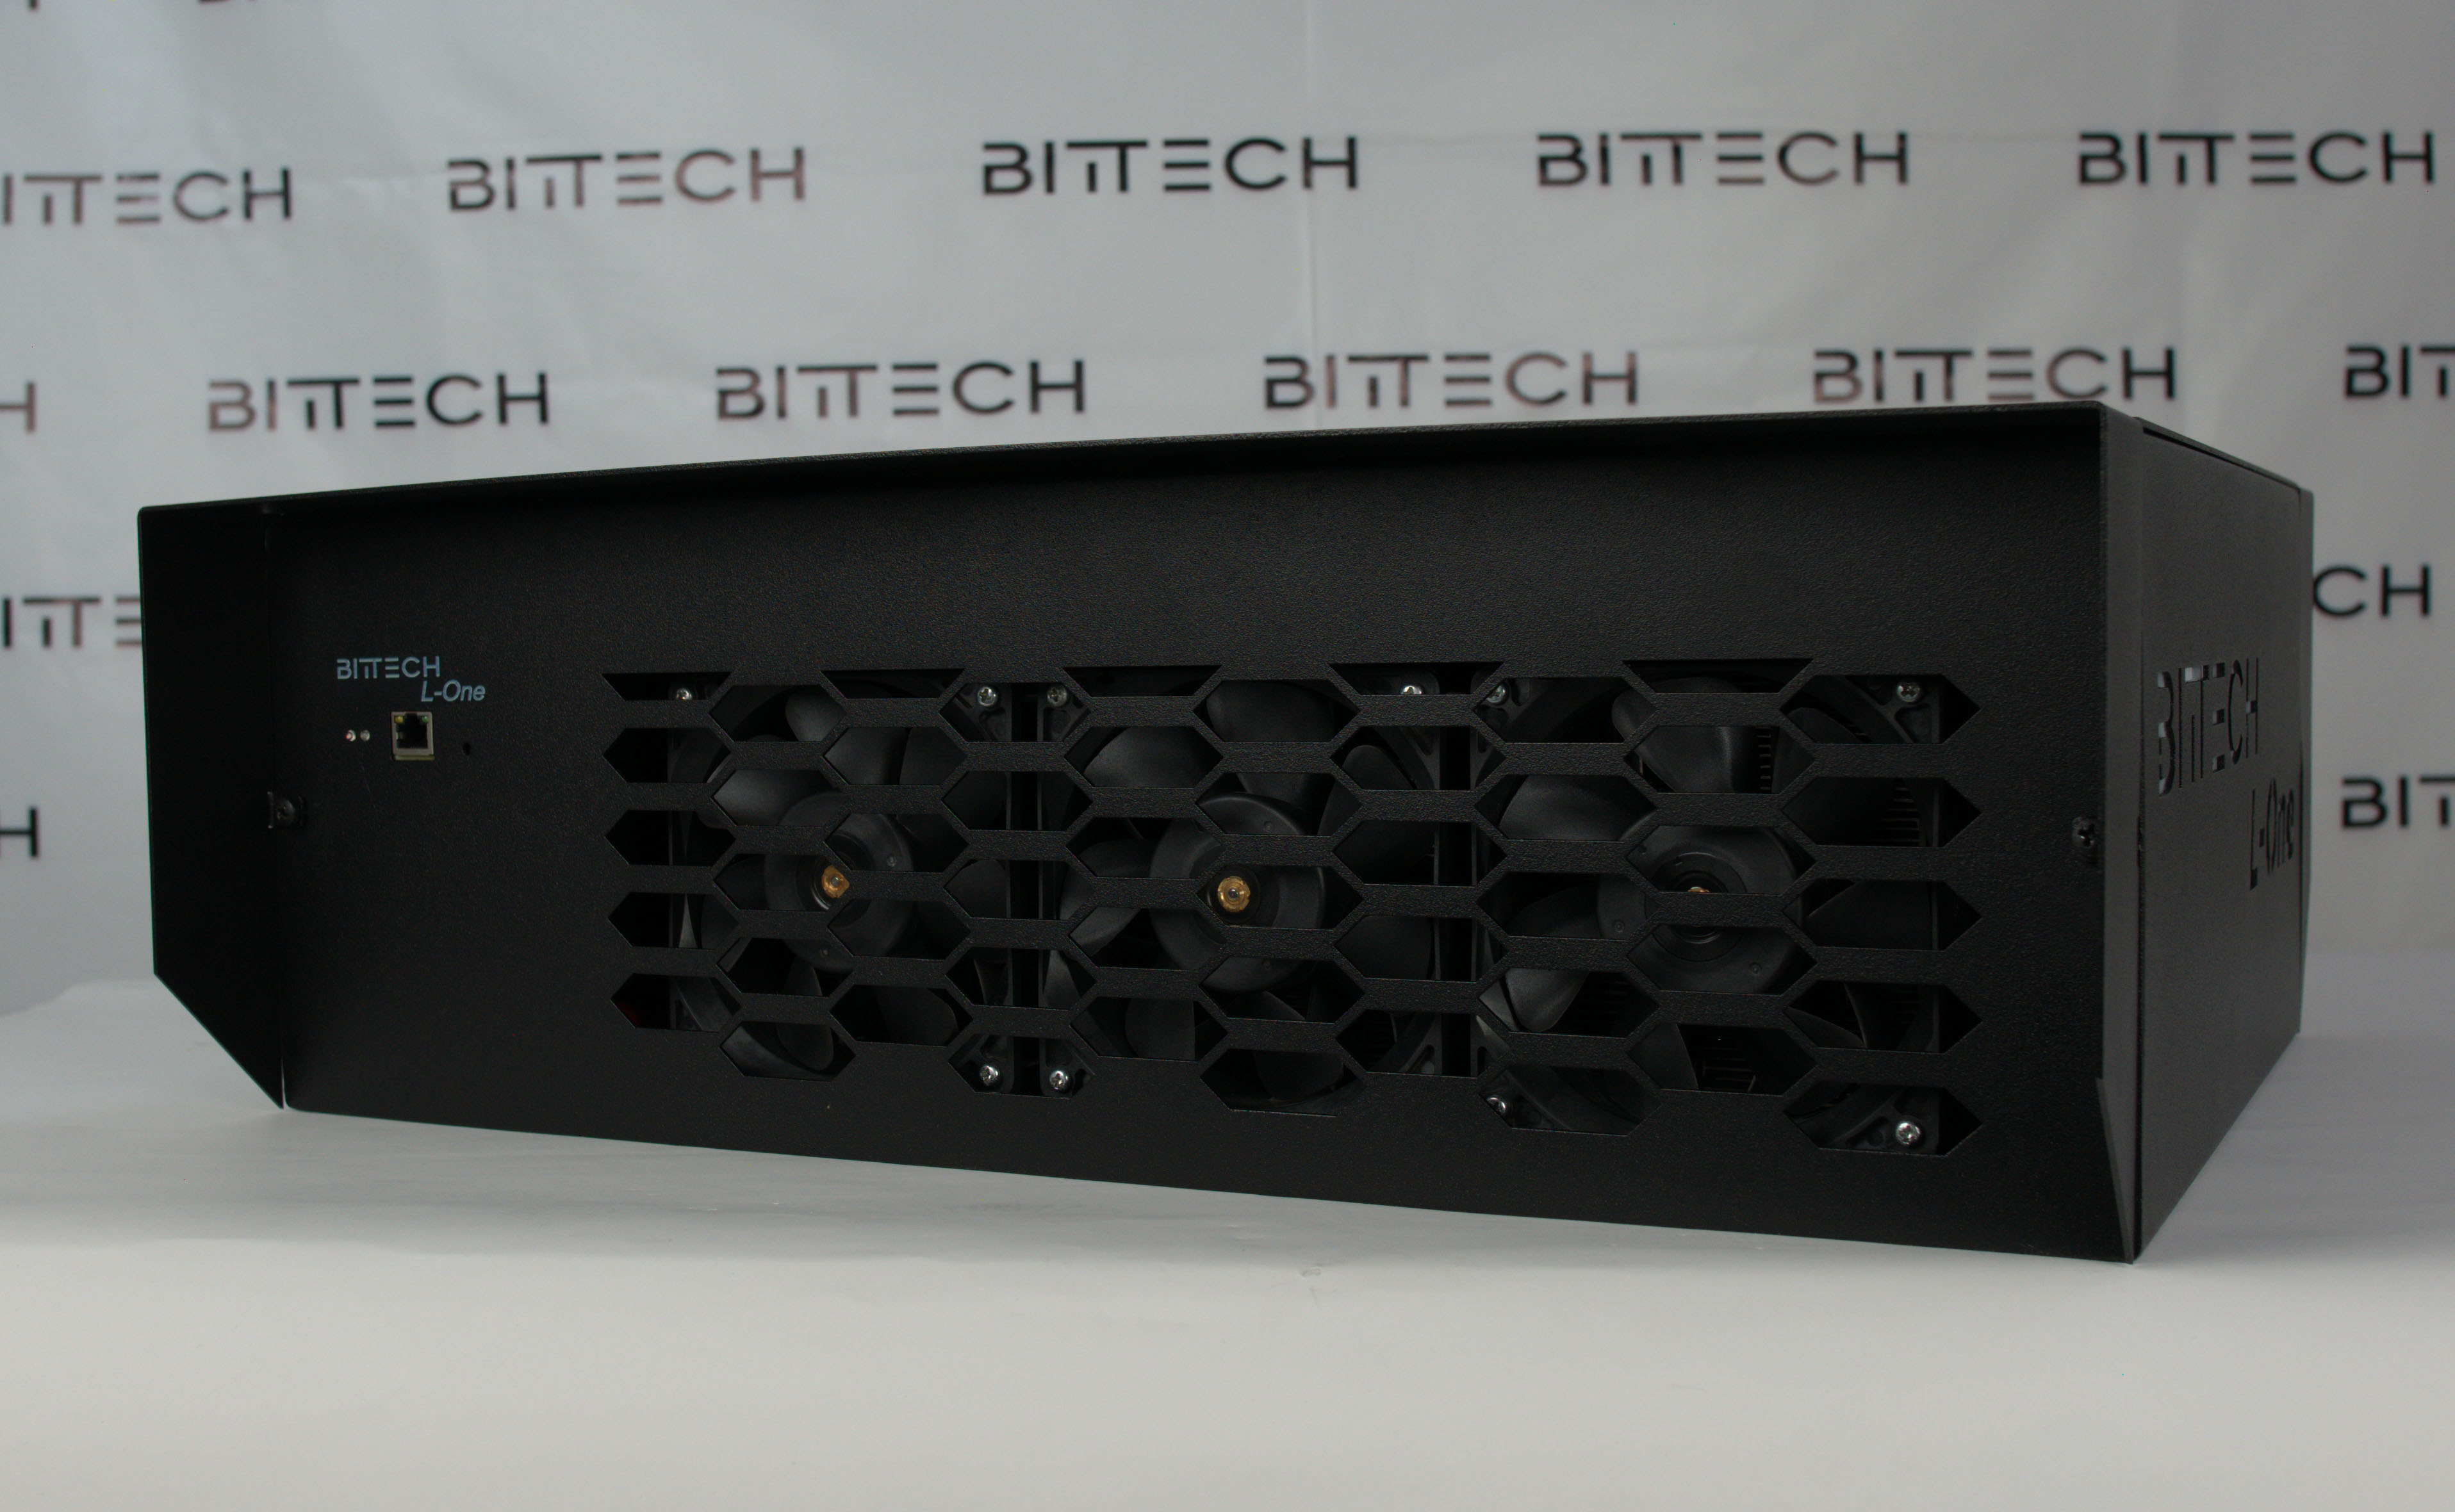 BITTECH Offers Two Mining Machine, Equipped with Mining Chipsusing a Cutting-Edge 10 Nm Process Technology